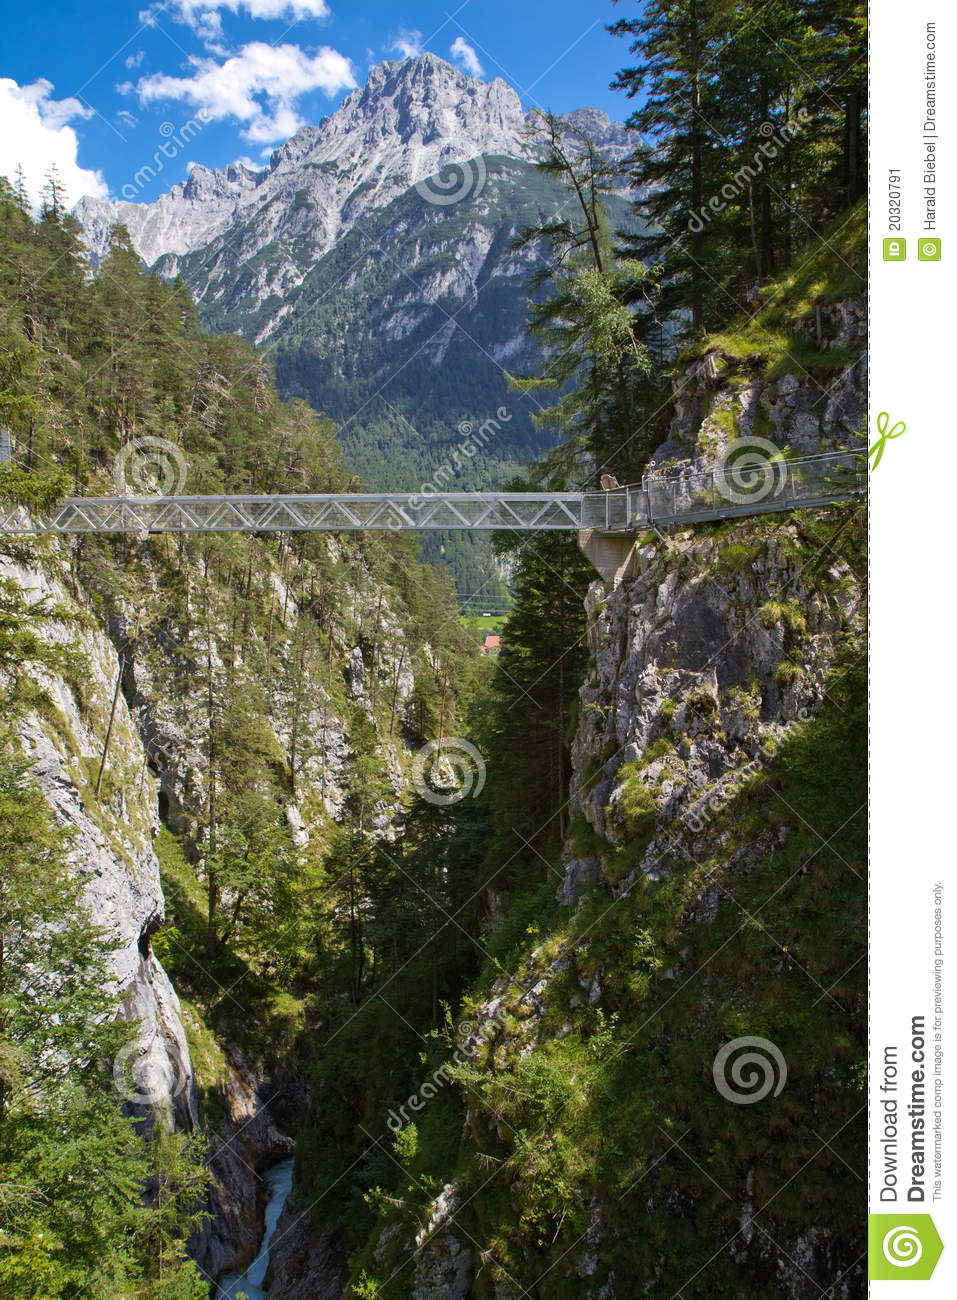 Leutasch Gorge In The German Alps Stock Image.